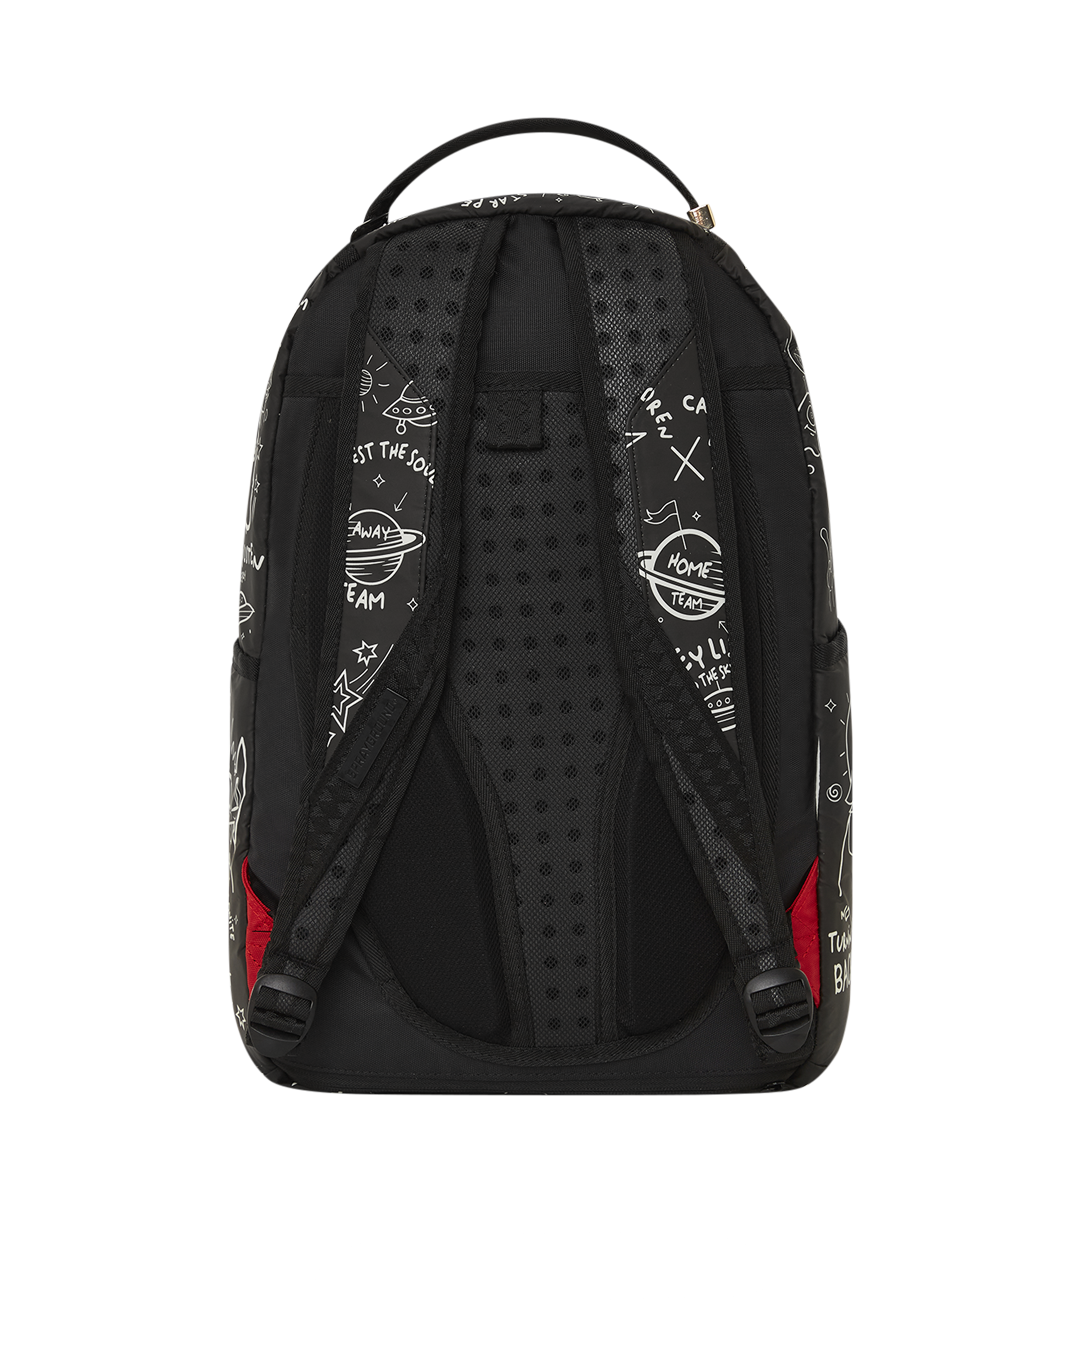 Sprayground glow the space backpack